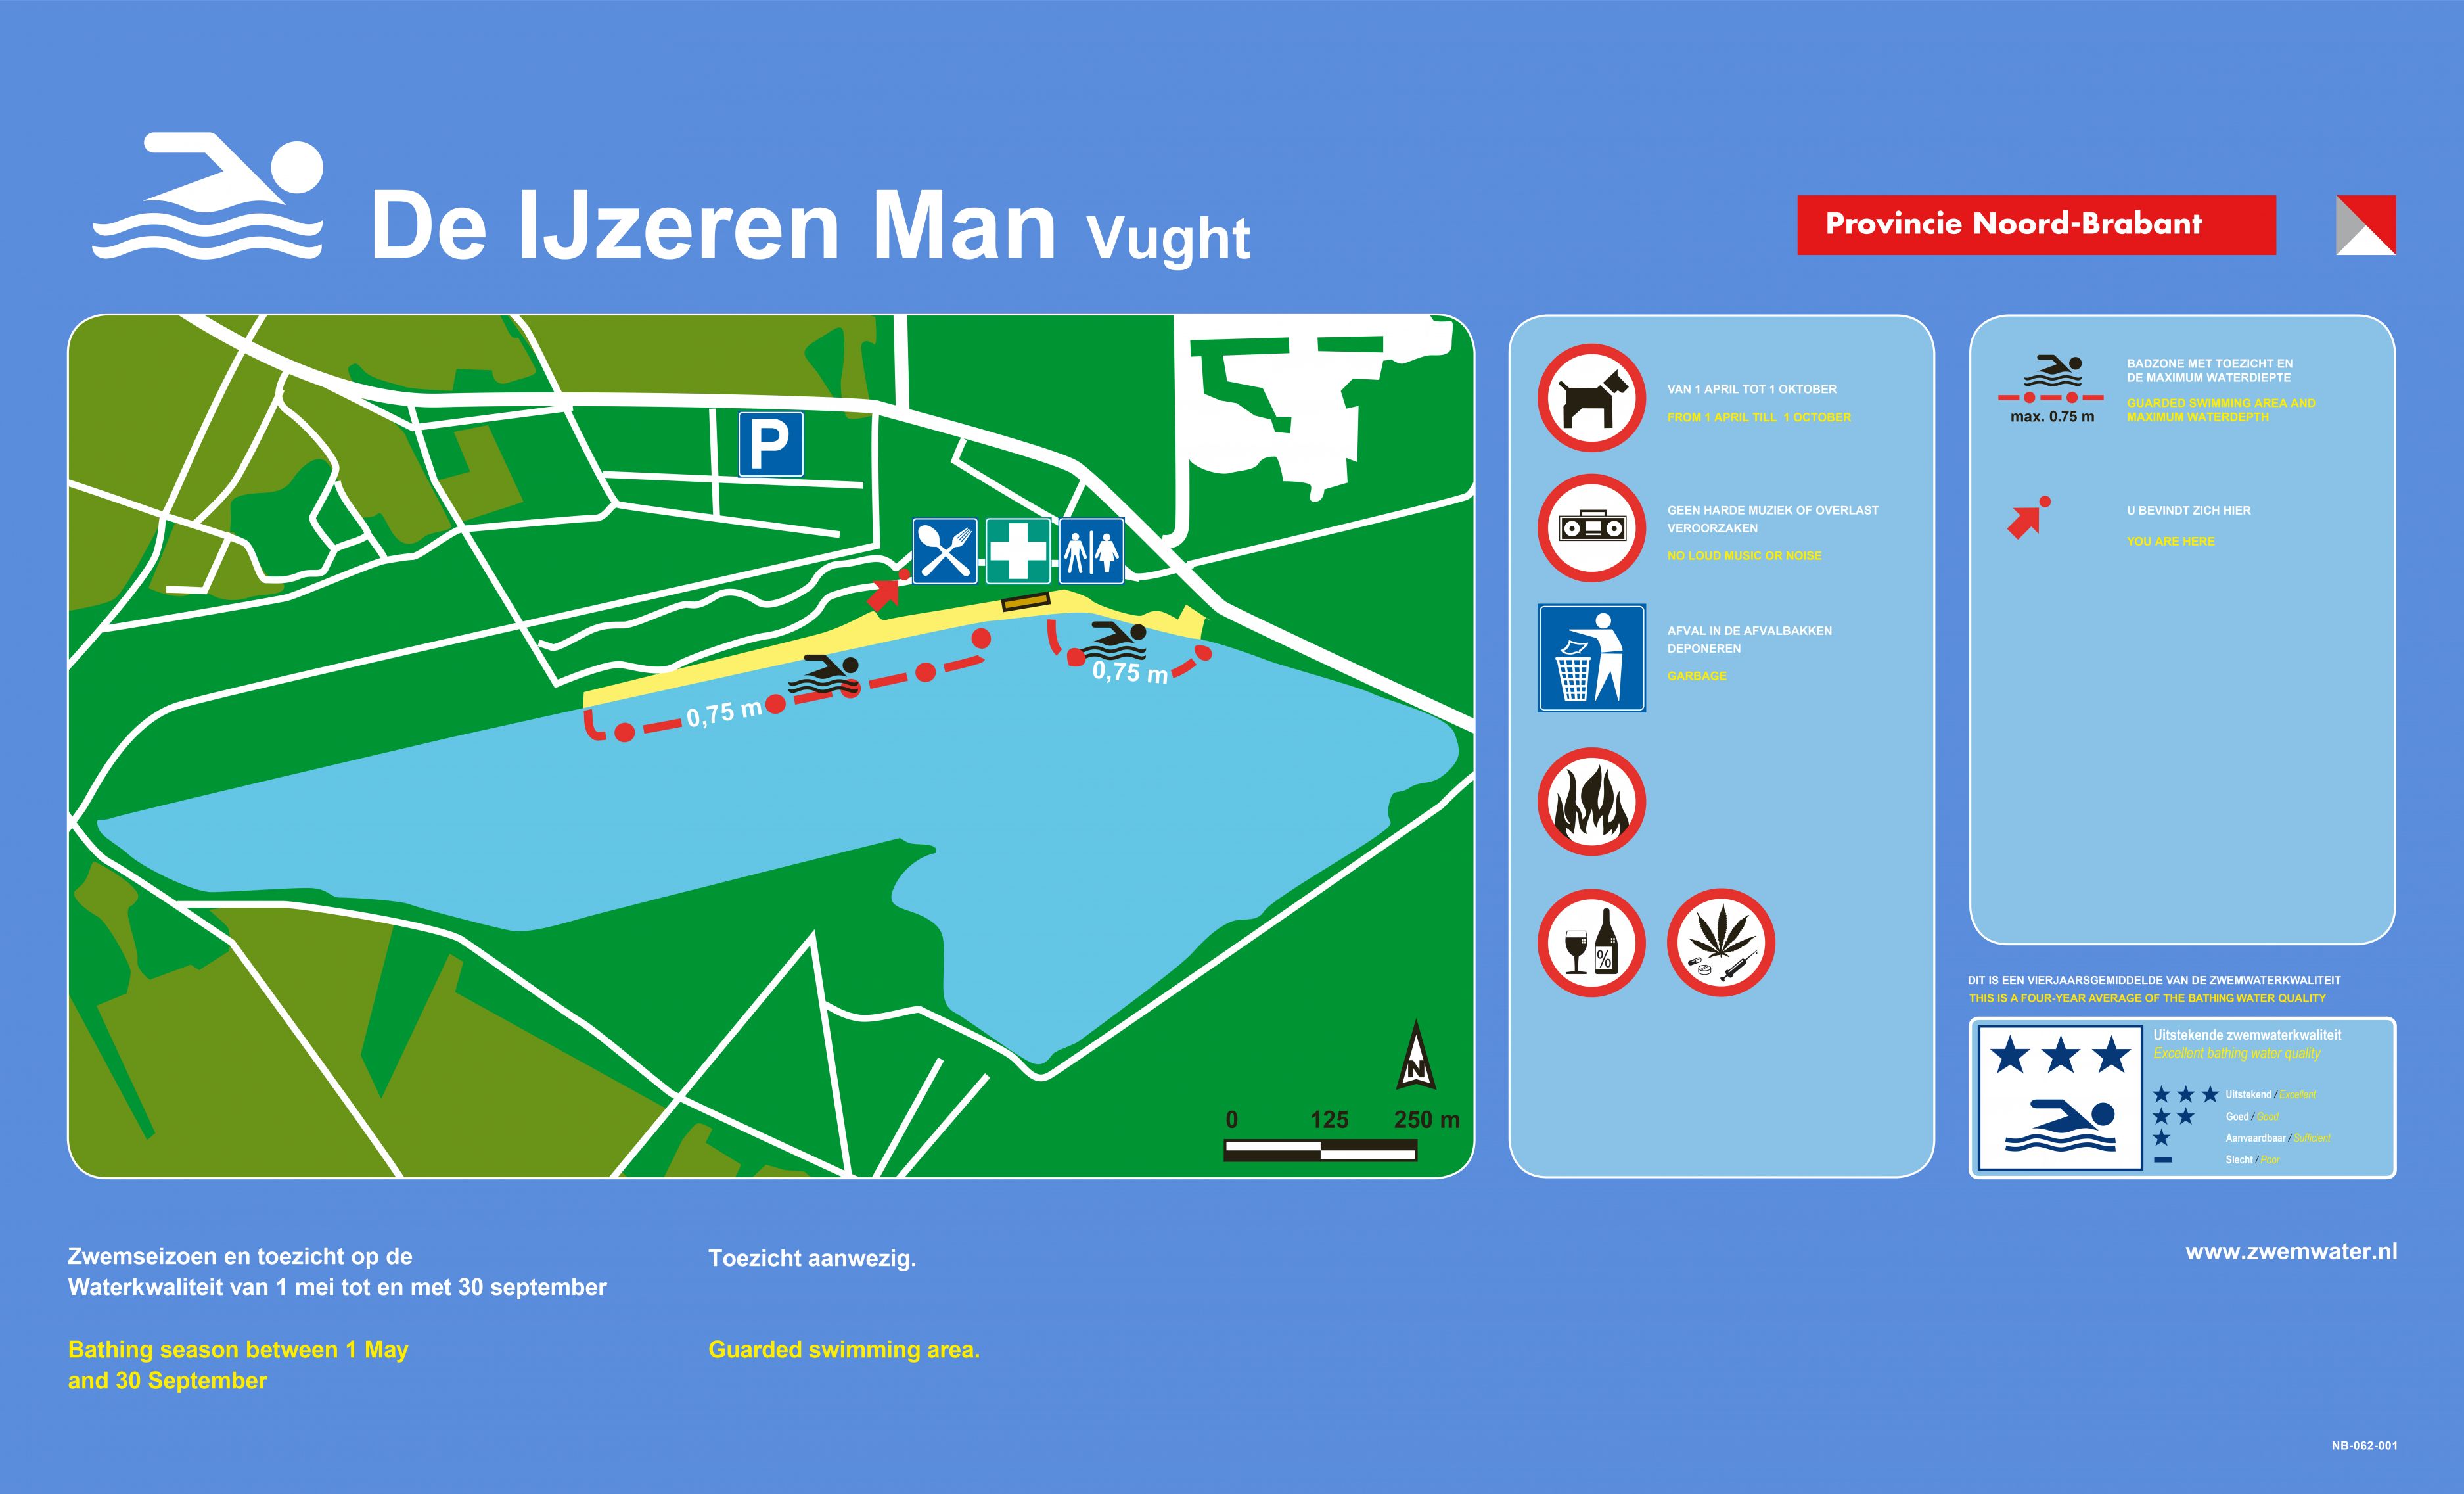 The information board at the swimming location Ijzeren Man (Bad)